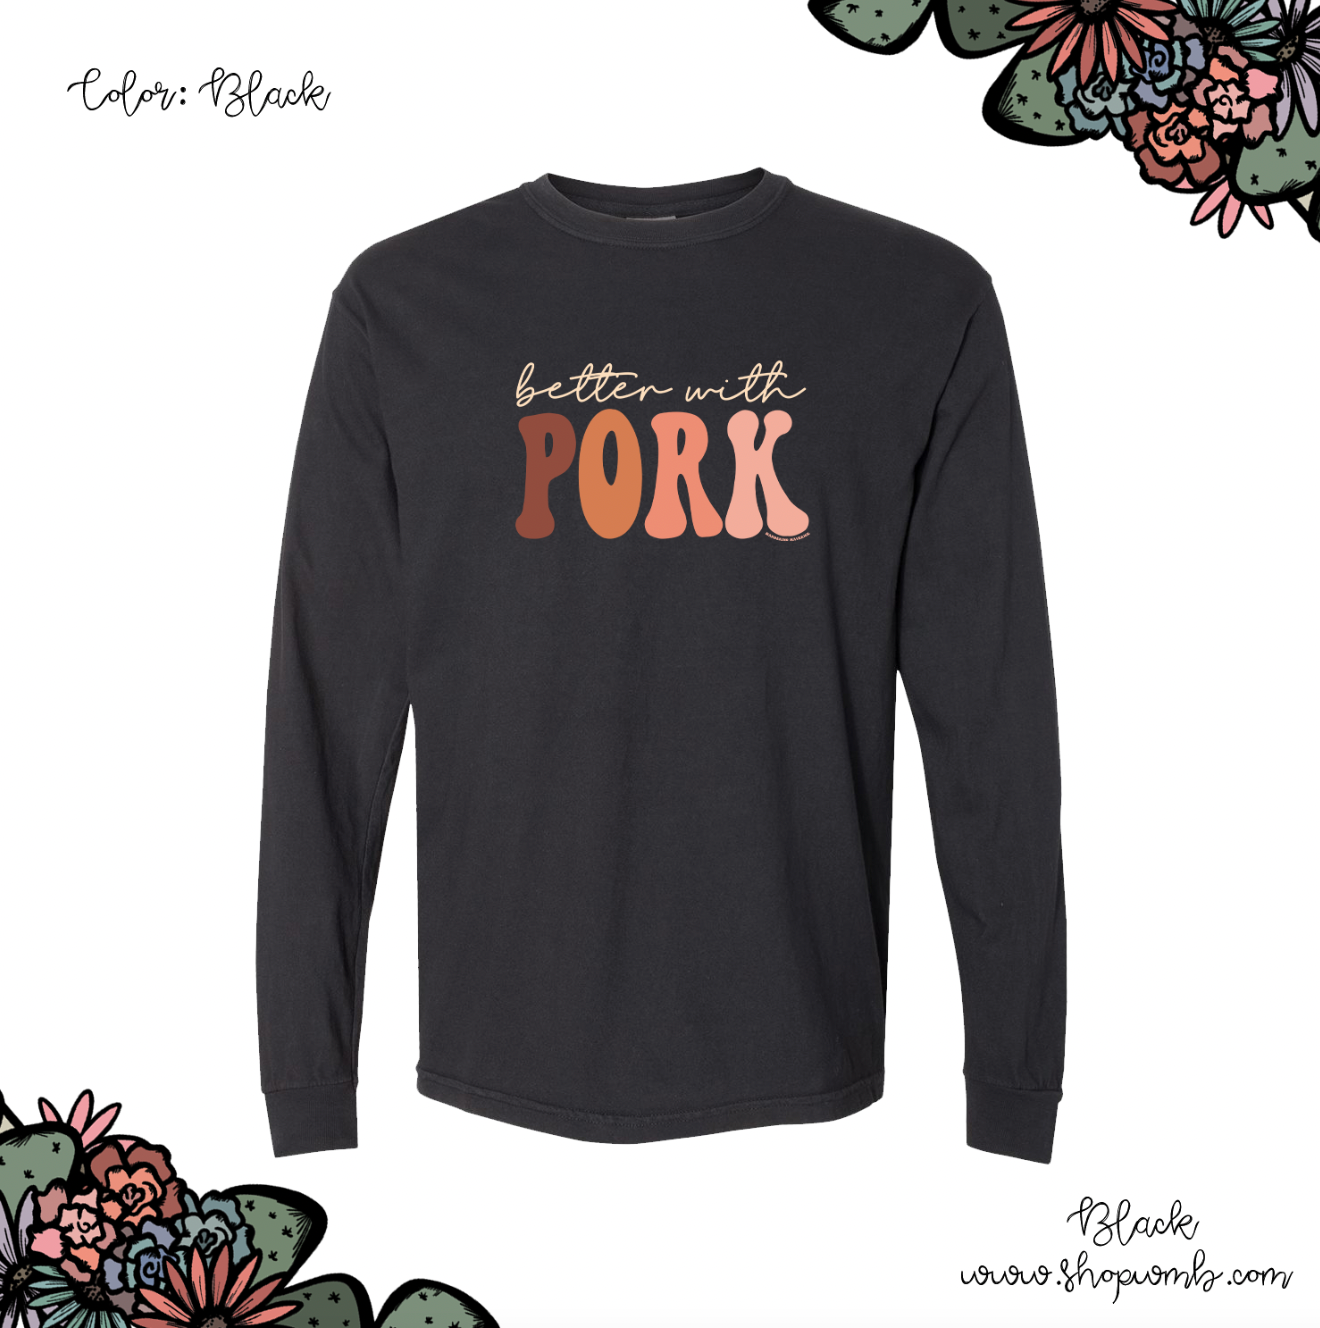 Better With Pork LONG SLEEVE T-Shirt (S-3XL) - Multiple Colors!